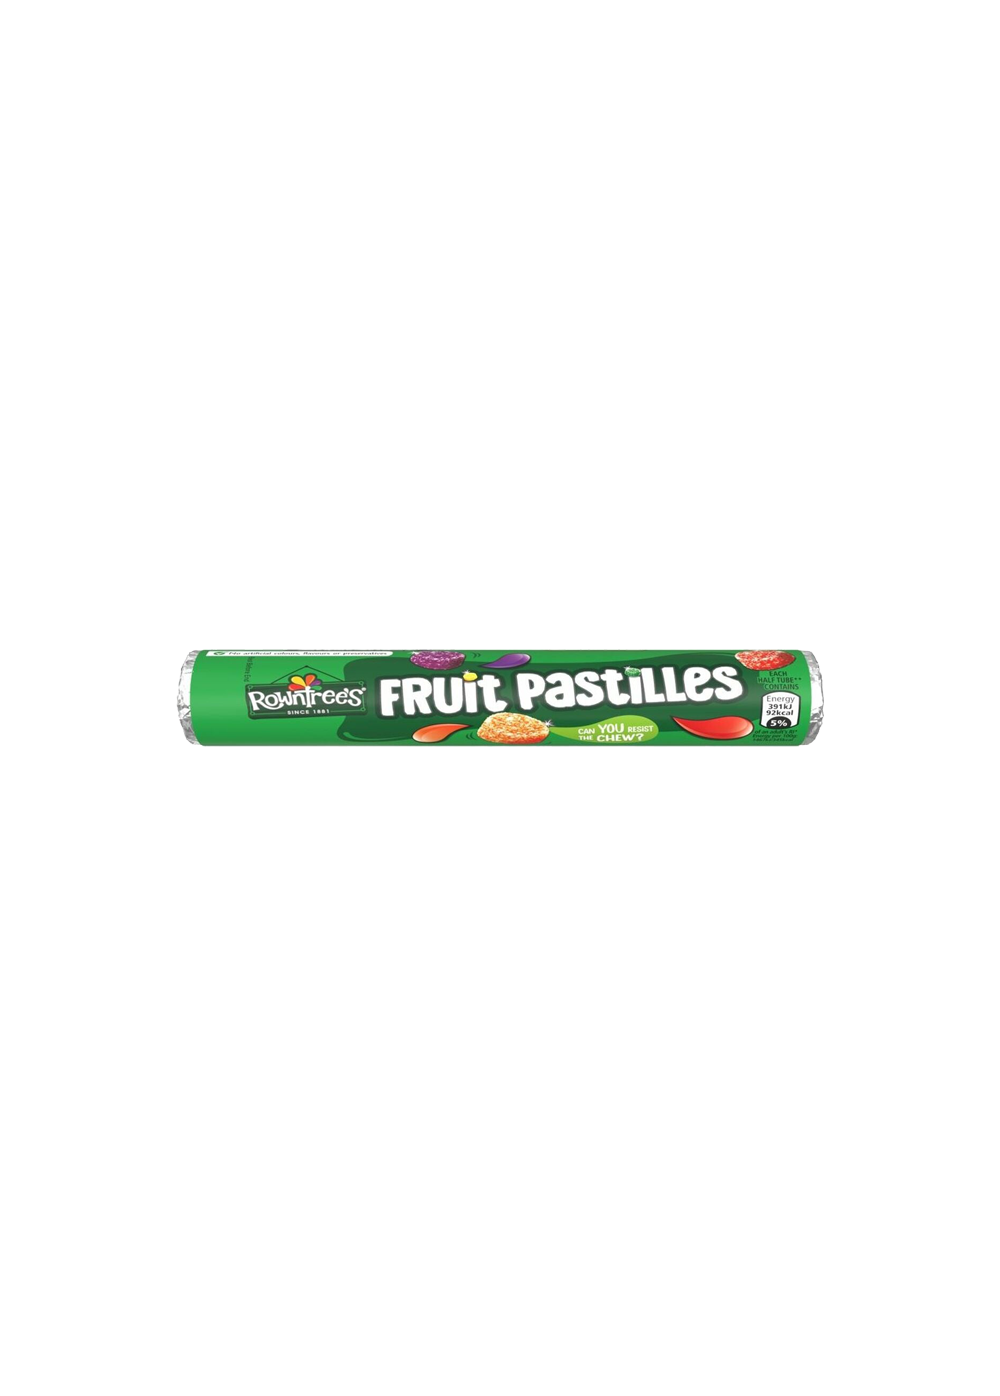 Rowntrees Fruit Pastilles Roll 50g